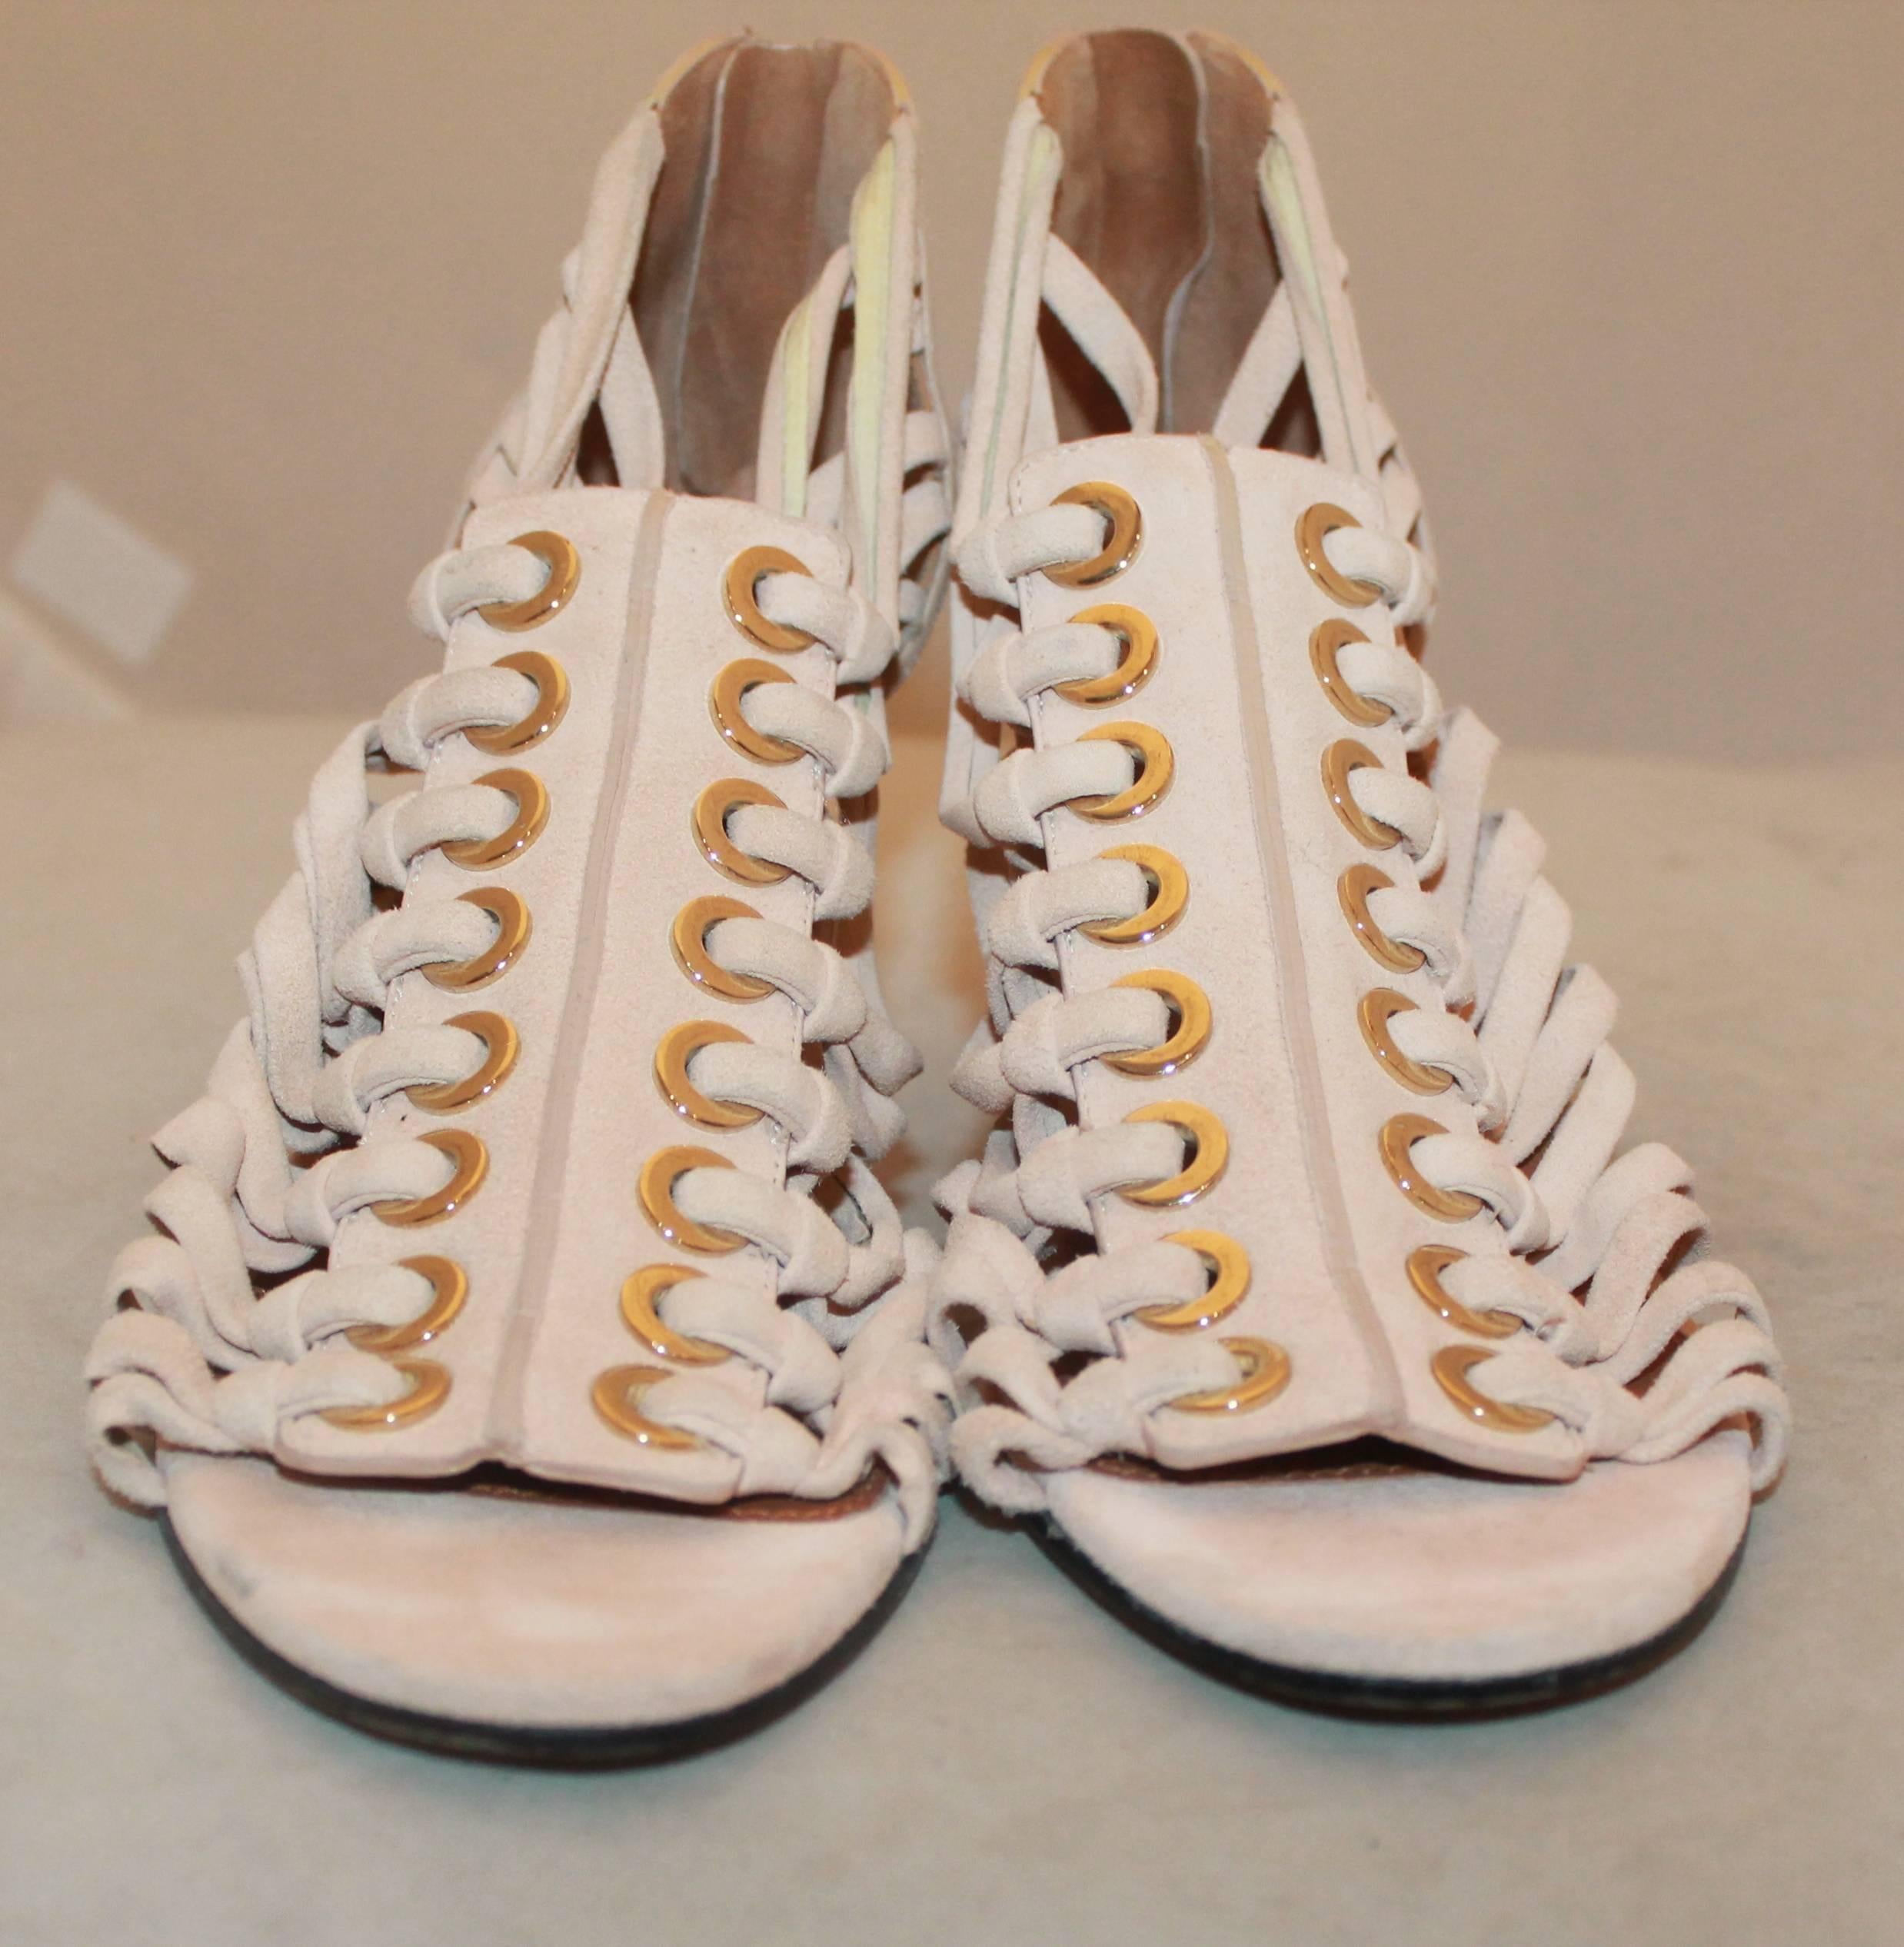 Givenchy Pale Pink Suede Strappy Heels - 8.  These sexy heels are in excellent condition with minimal wear to the sole from very minor use.  They feature a gorgeous, girl pale pink suede material, numerous straps, and a back zipper.  These heels are